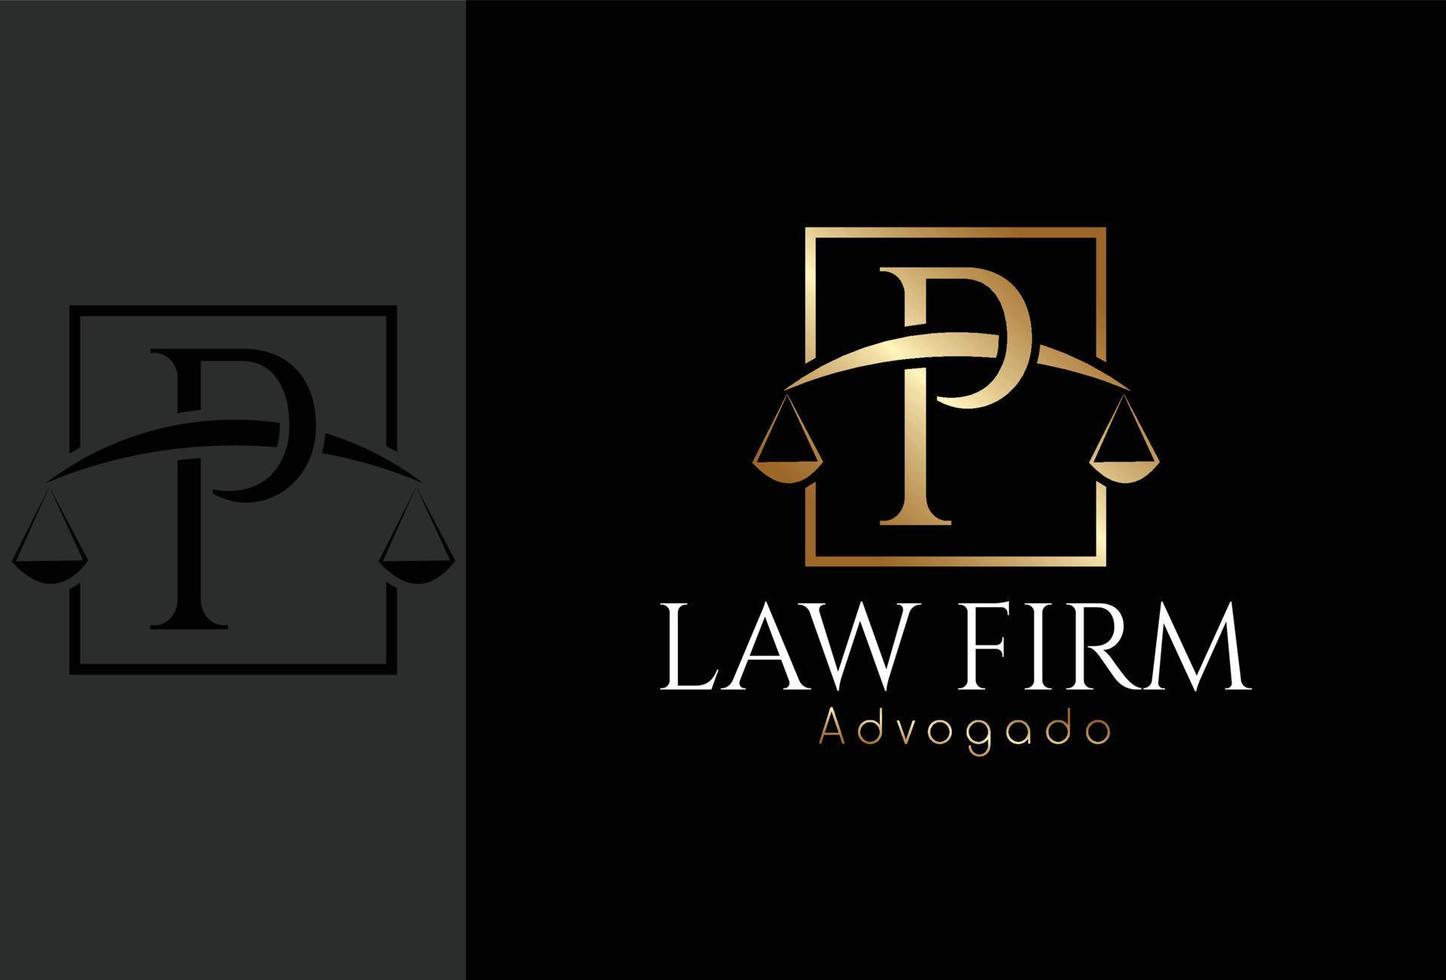 Logo Advogado, advocacy based on the initial letter p vector